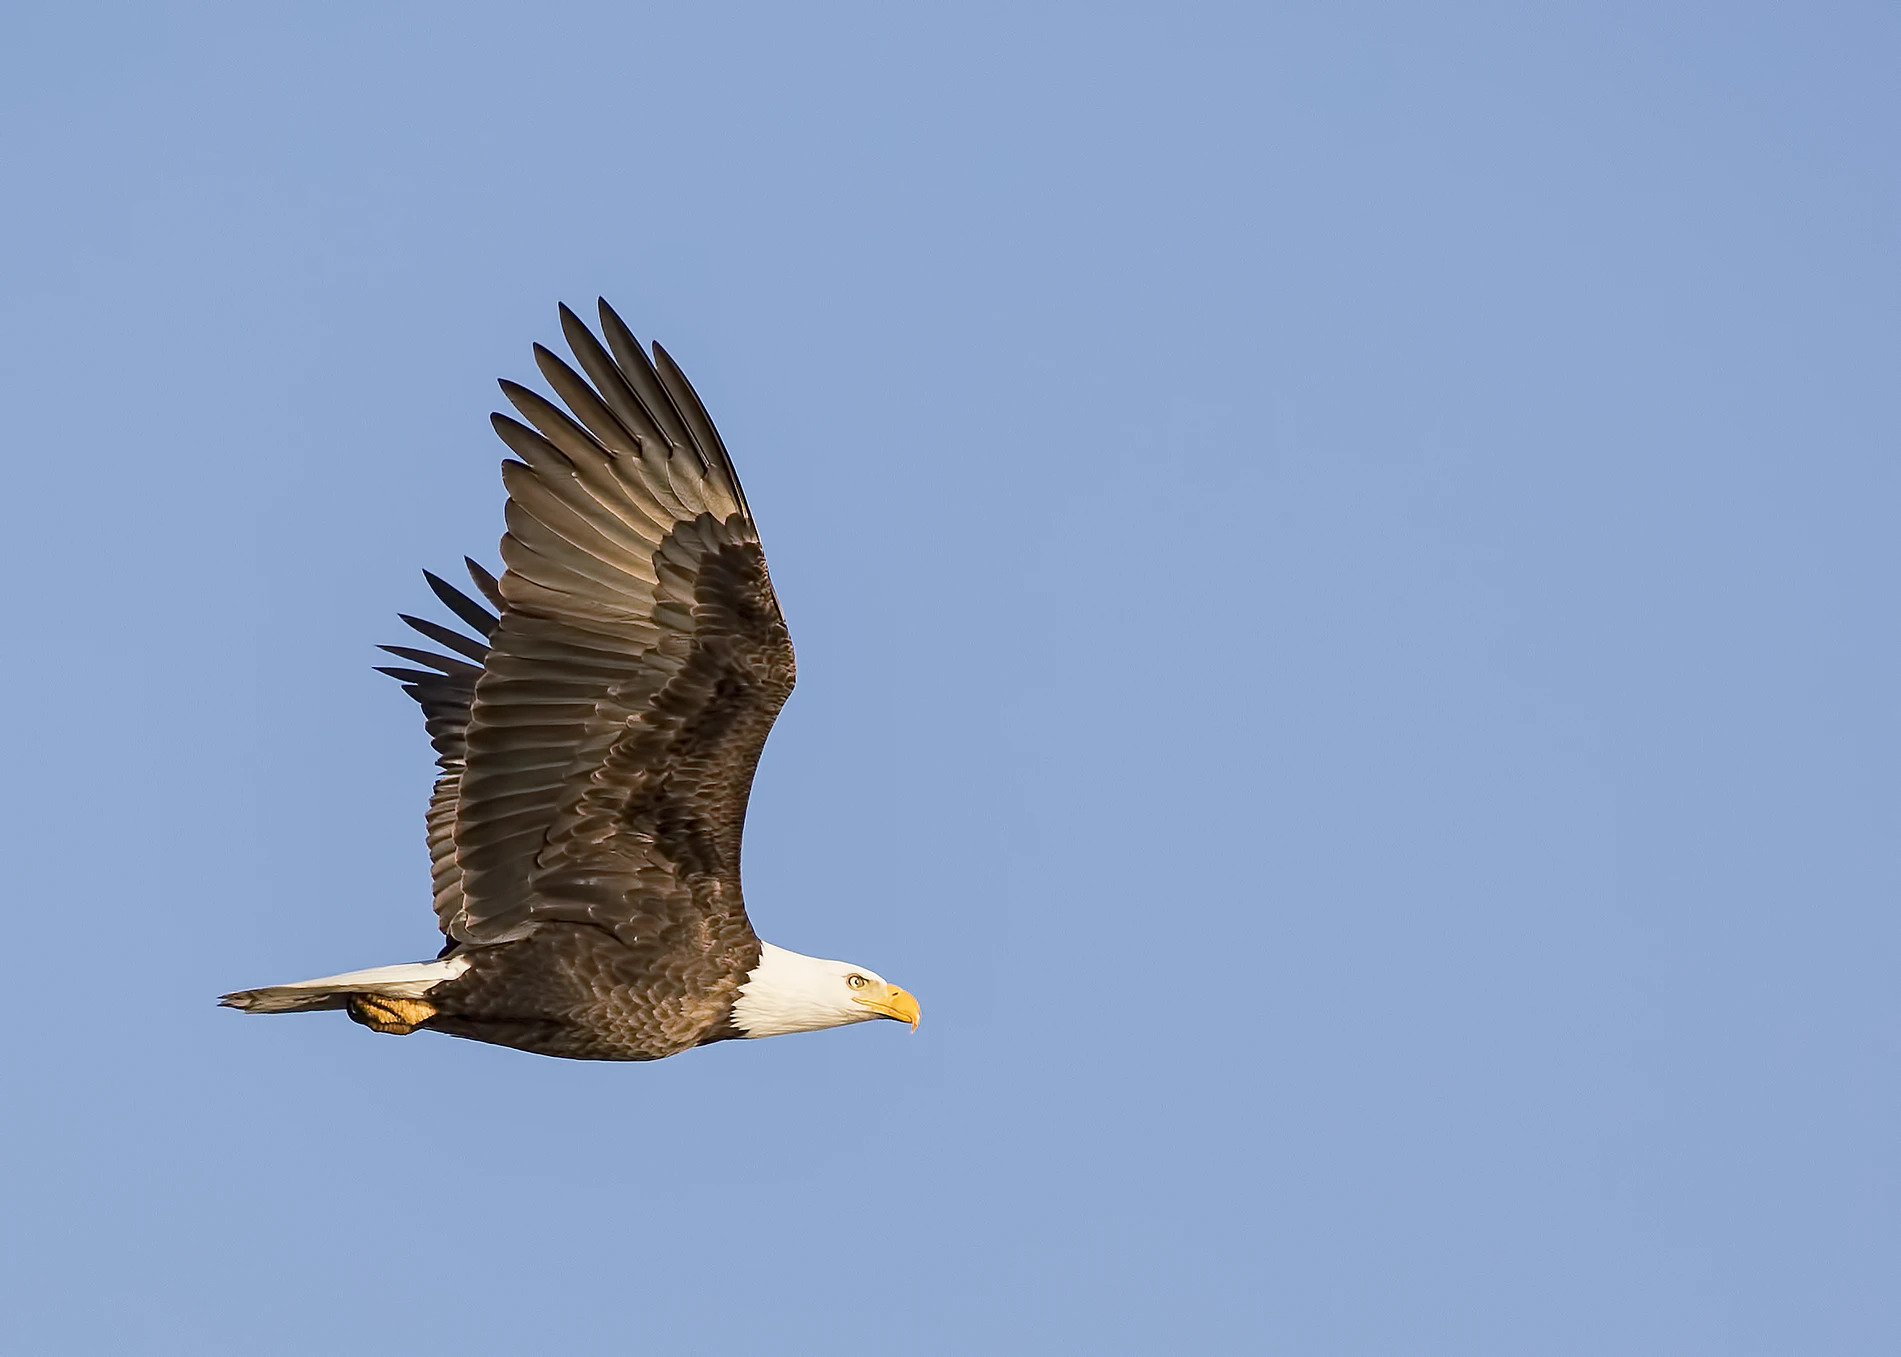 In 2009 there were only around 72,000 bald eagles in the lower 48 states, but now researchers say the population is above 300,000 — including more than 71,400 nesting pairs. Learn more ?